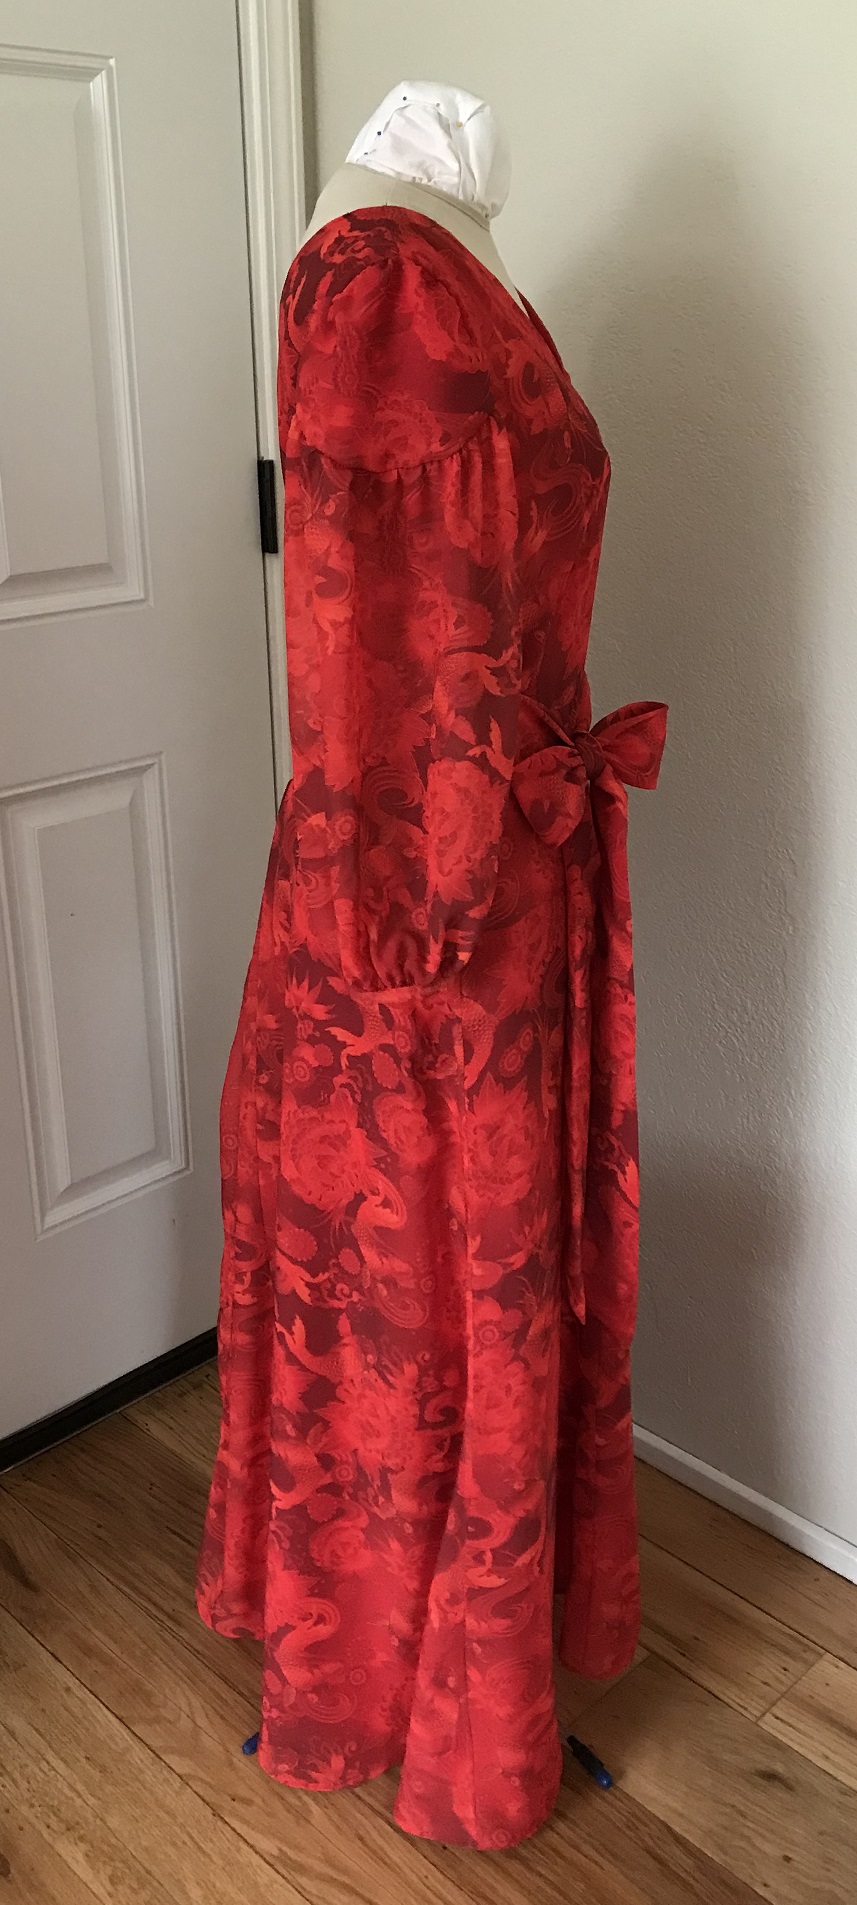 1927 Reproduction Red Koi Dress Right.